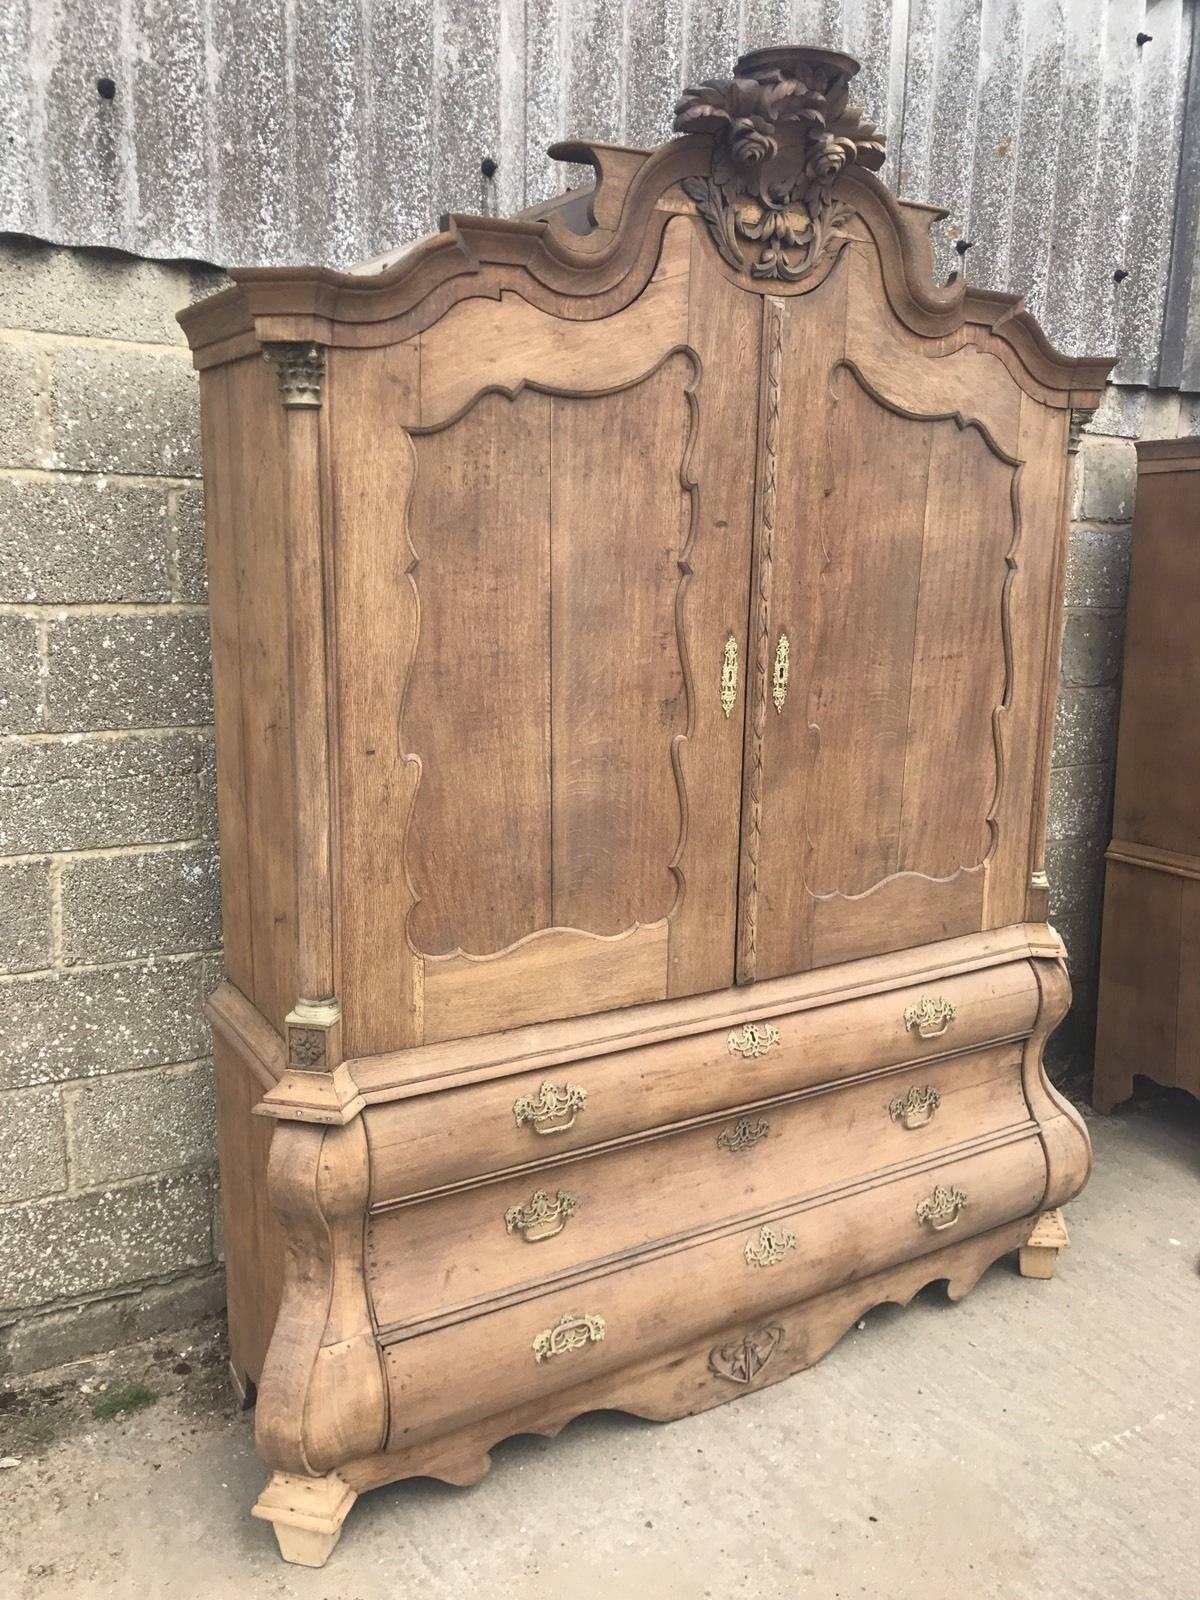 Here we have a stunning French linen press or armoire. It's been stripped back to its original wood and has fabulous patina from over the centuries. Dated circa 1780s.

Dismantled for ease of transportation. Price includes putting together at your